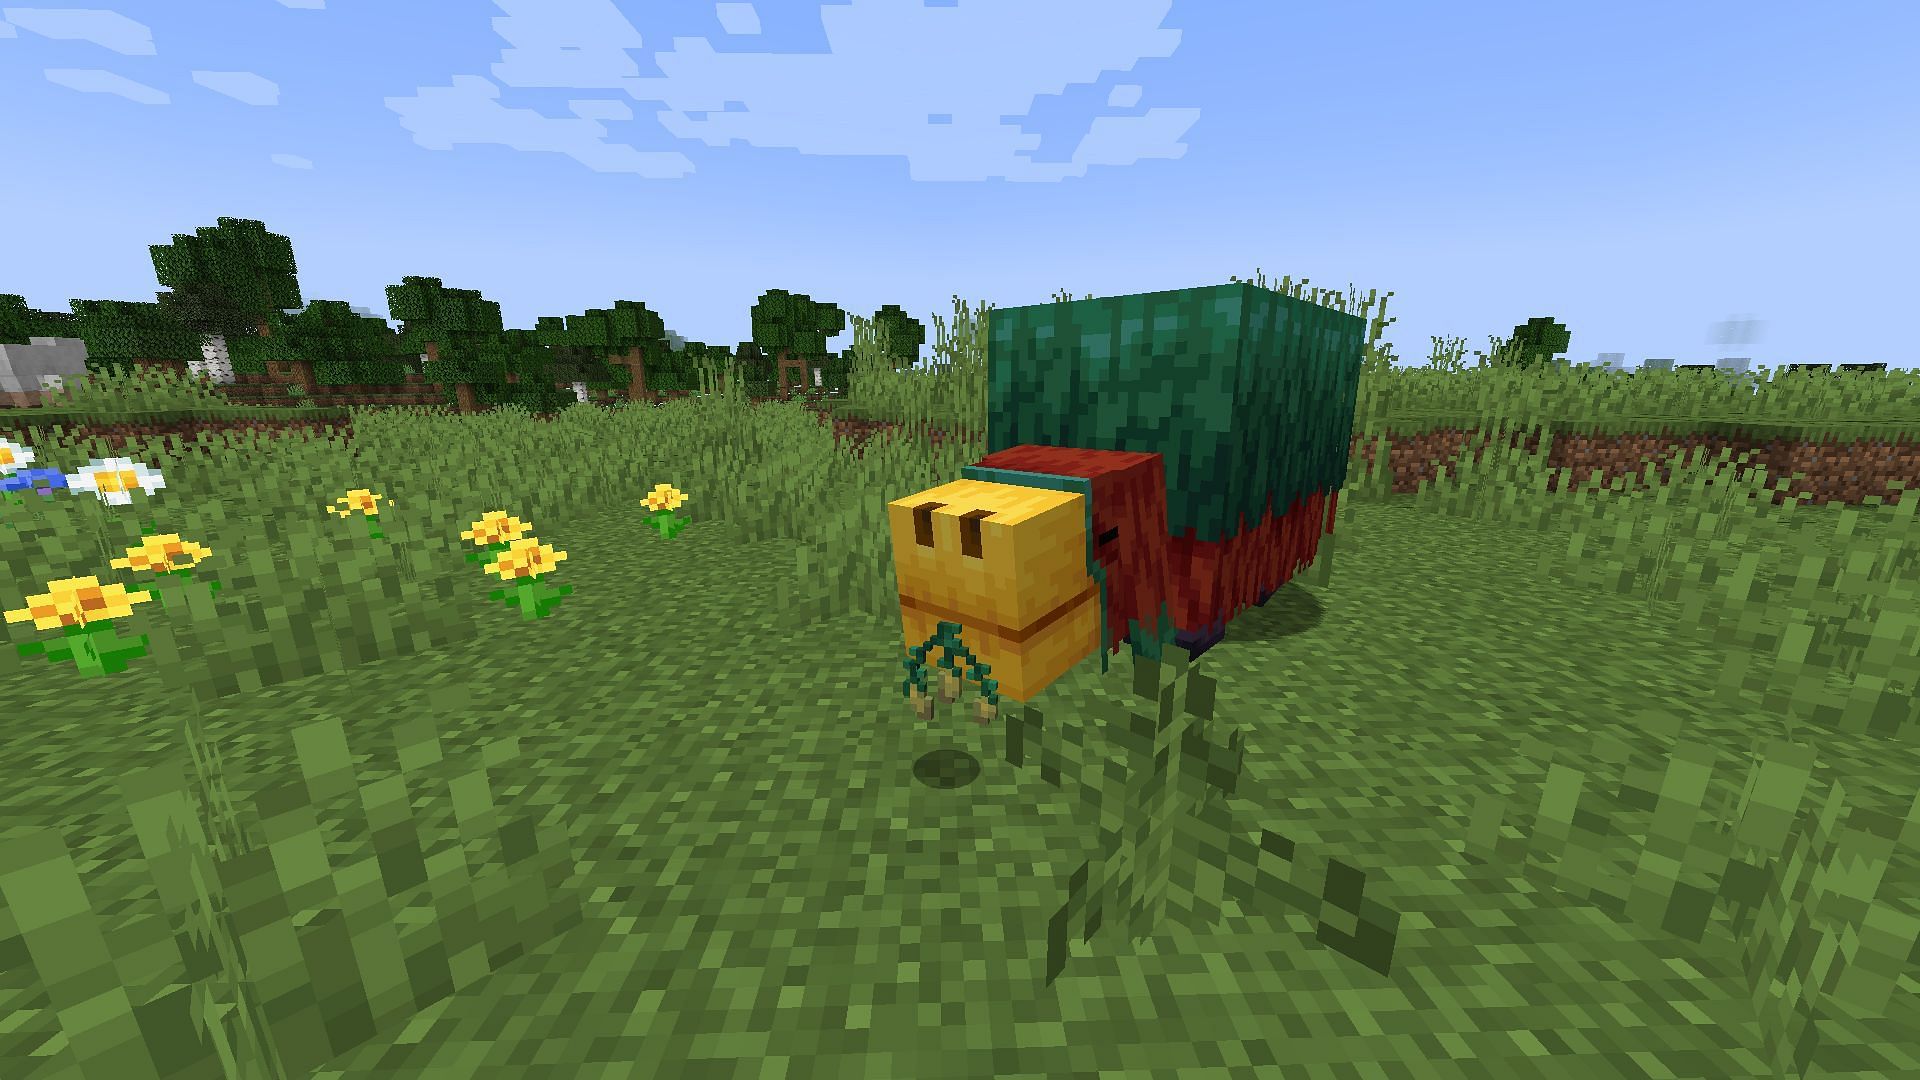 Sniffer was the mob vote winner and will be added to the Minecraft 1.20 update (Image via Mojang)